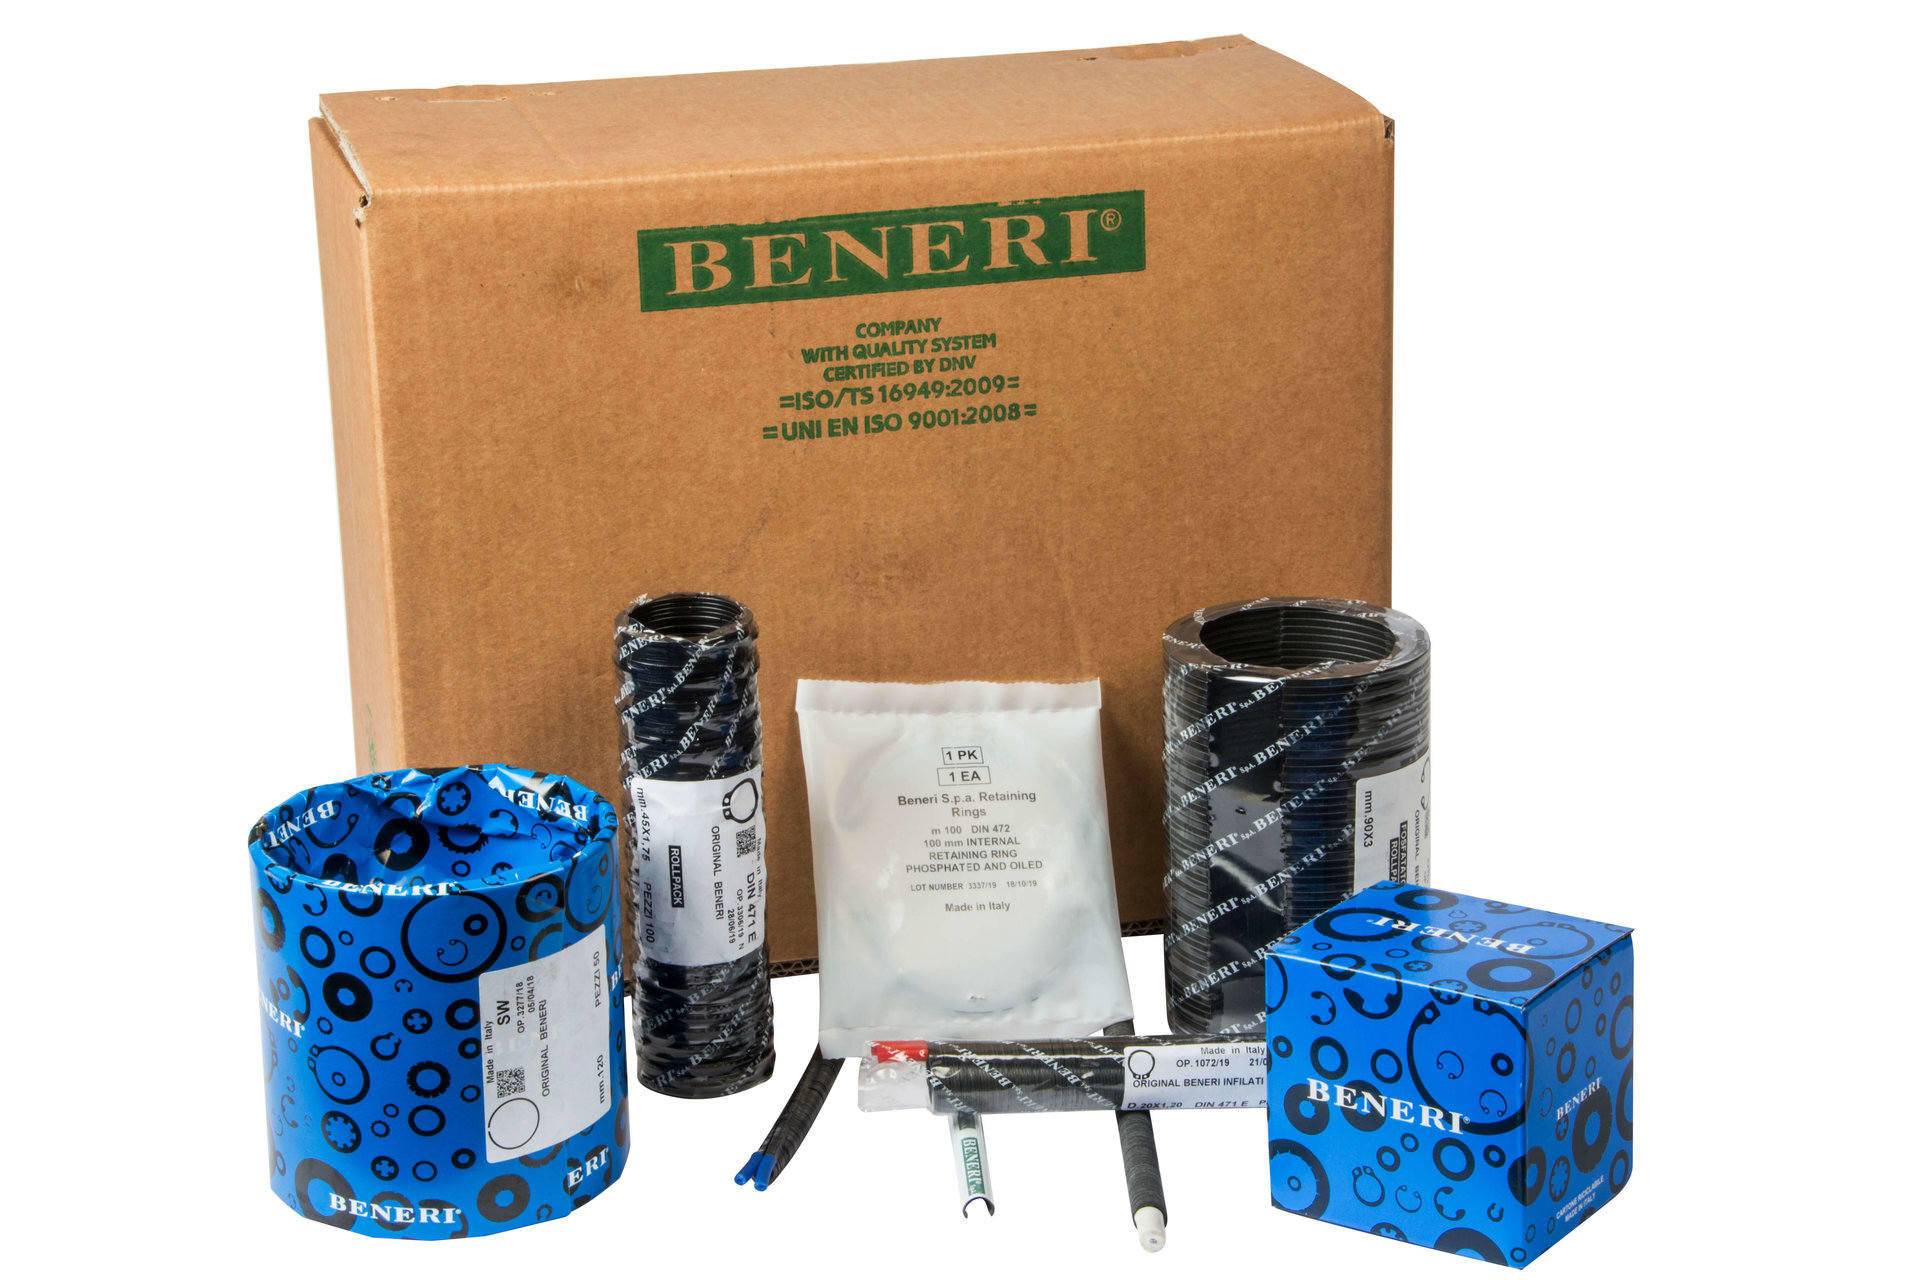 Packaging of Beneri products